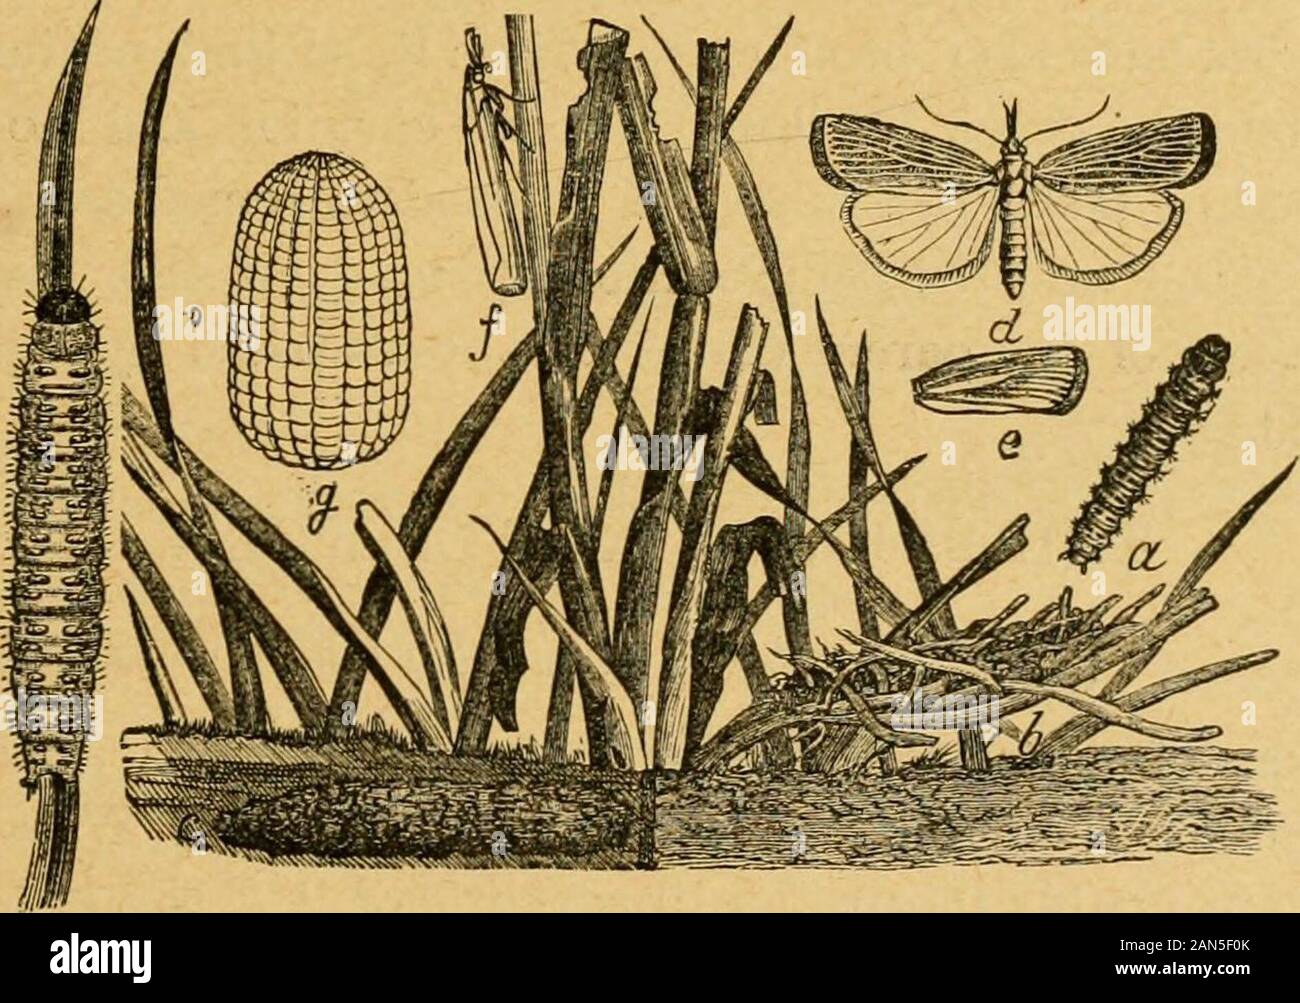 A preliminary introduction to the study of entomologyTogether with a chapter on remedies, or methods that can be used in fighting injurious insects; insect enemies of the apple tree and its fruit, and the insect enemies of small grains . iquids. THE VAGABOND CEAMBUS. {Crambus vulqivagellus Clem.)The insect which is figured herewith, although normally a Fig. 50.—Ephestia inter-punctella: a, larva; 6, pupa;c, imago—enlarged; d, headand thoracic joints of larvastill more enlarged,—[InsectLife.] INSECT ENEMIES OF SMALL GKAINS. 243 &lt;^rass-feediug species, is nevertiieless at times quite an enemy Stock Photo